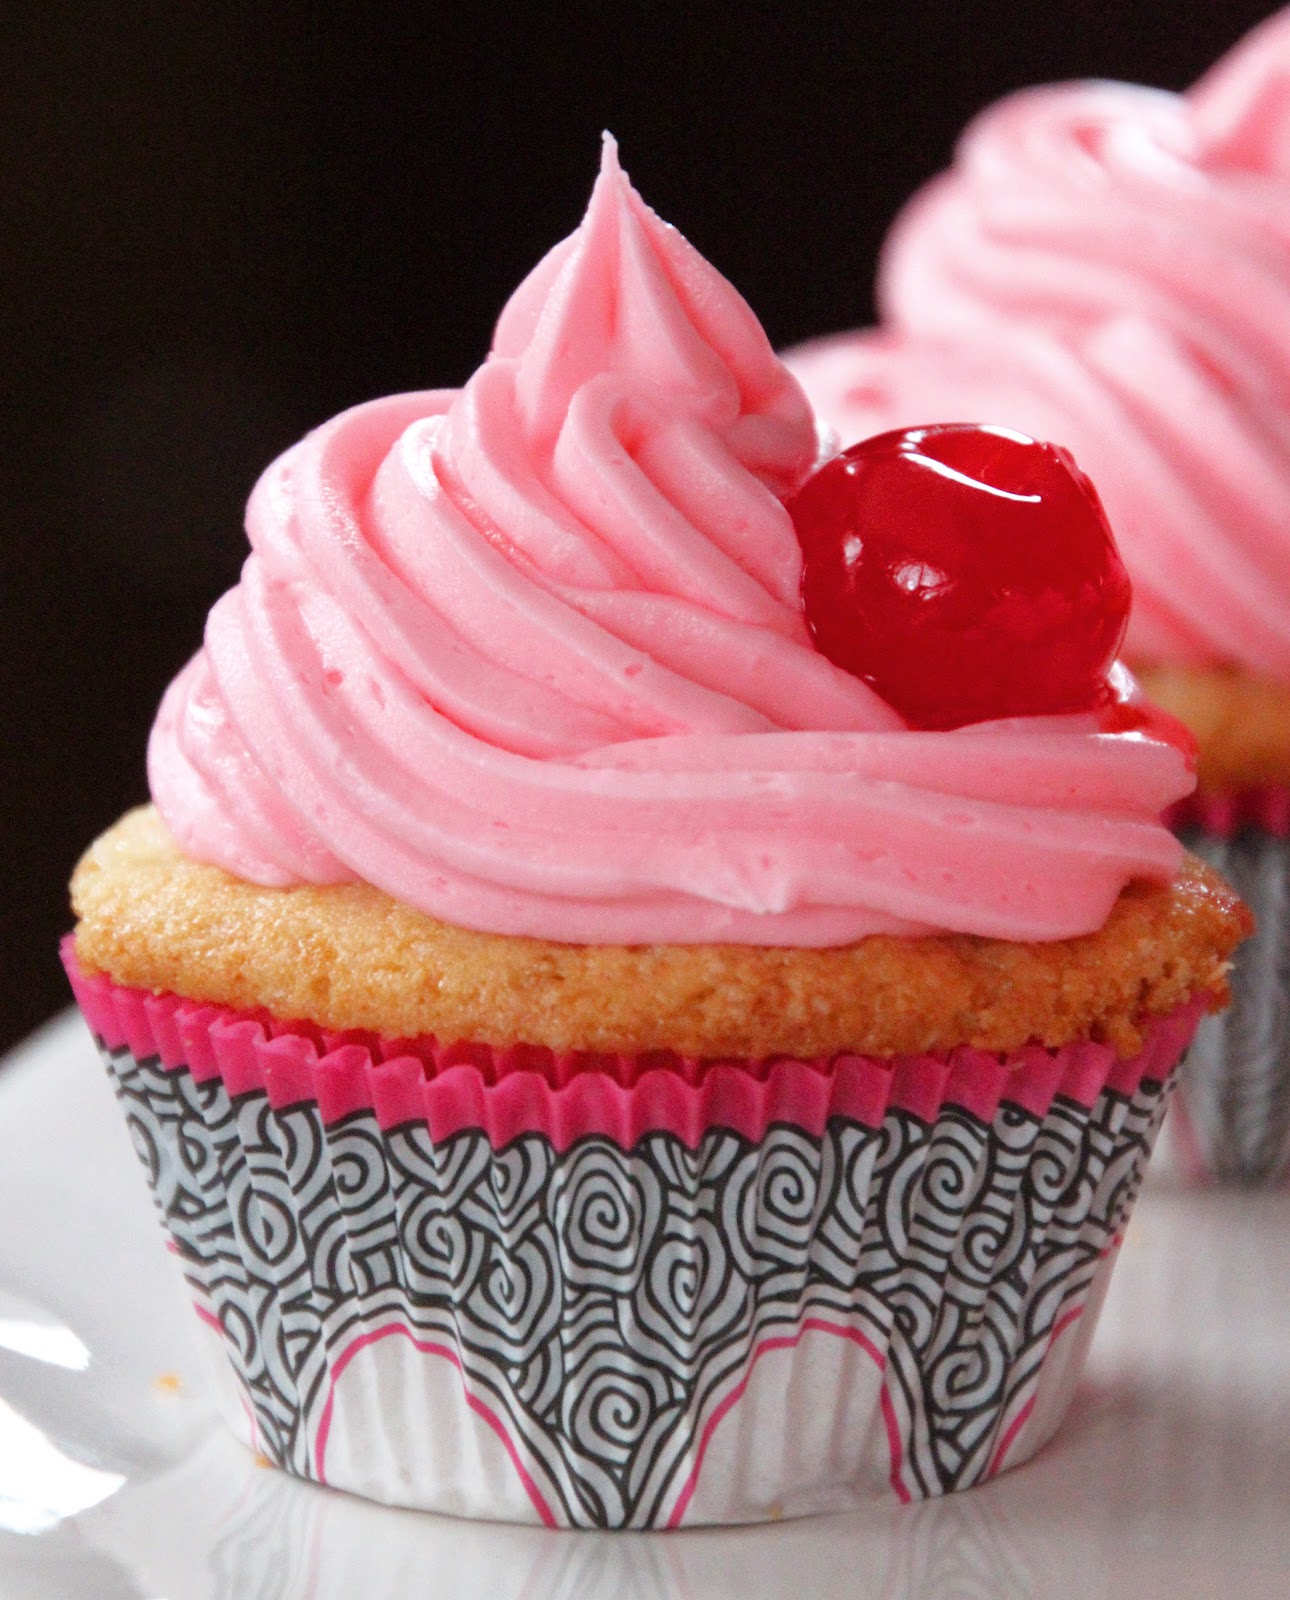 Almond Maraschino Cherry Cupcakes - Your Cup of Cake